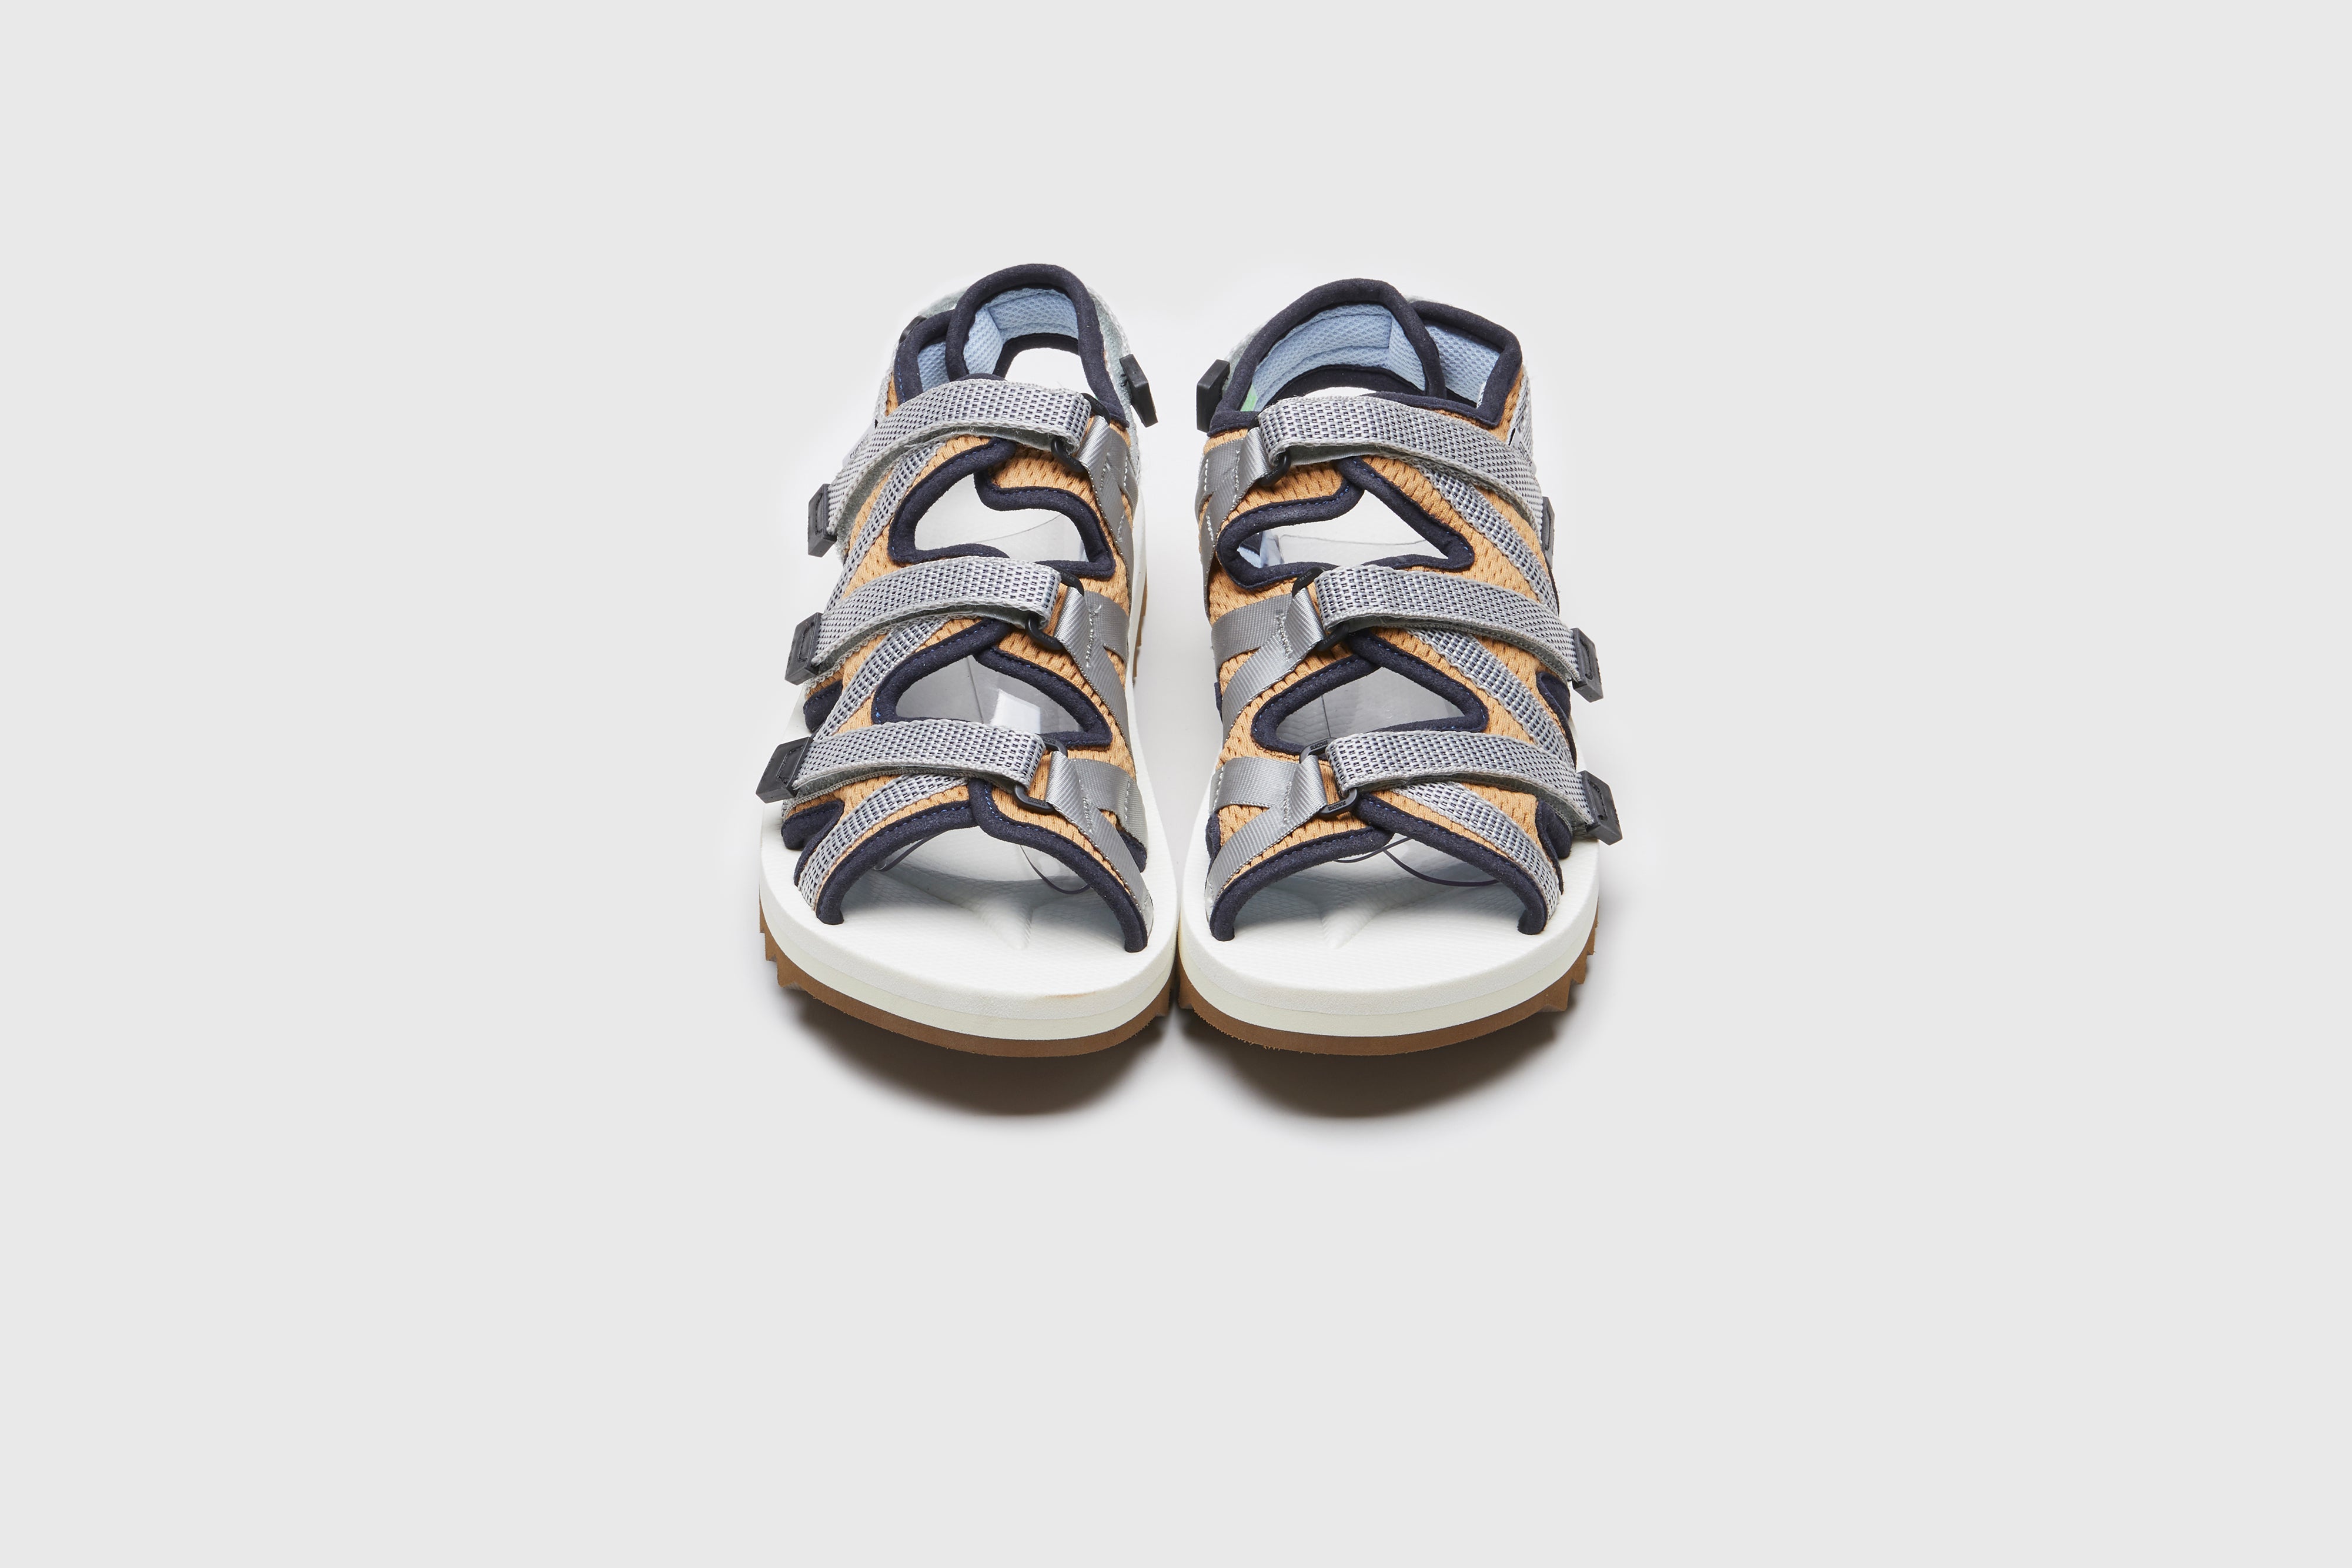 SUICOKE ZIP-ab sandals with navy & white nylon upper, navy & white midsole and sole, strap and logo patch. From Spring/Summer 2023 collection on eightywingold Web Store, an official partner of SUICOKE. OG-229AB NAVY X WHITE